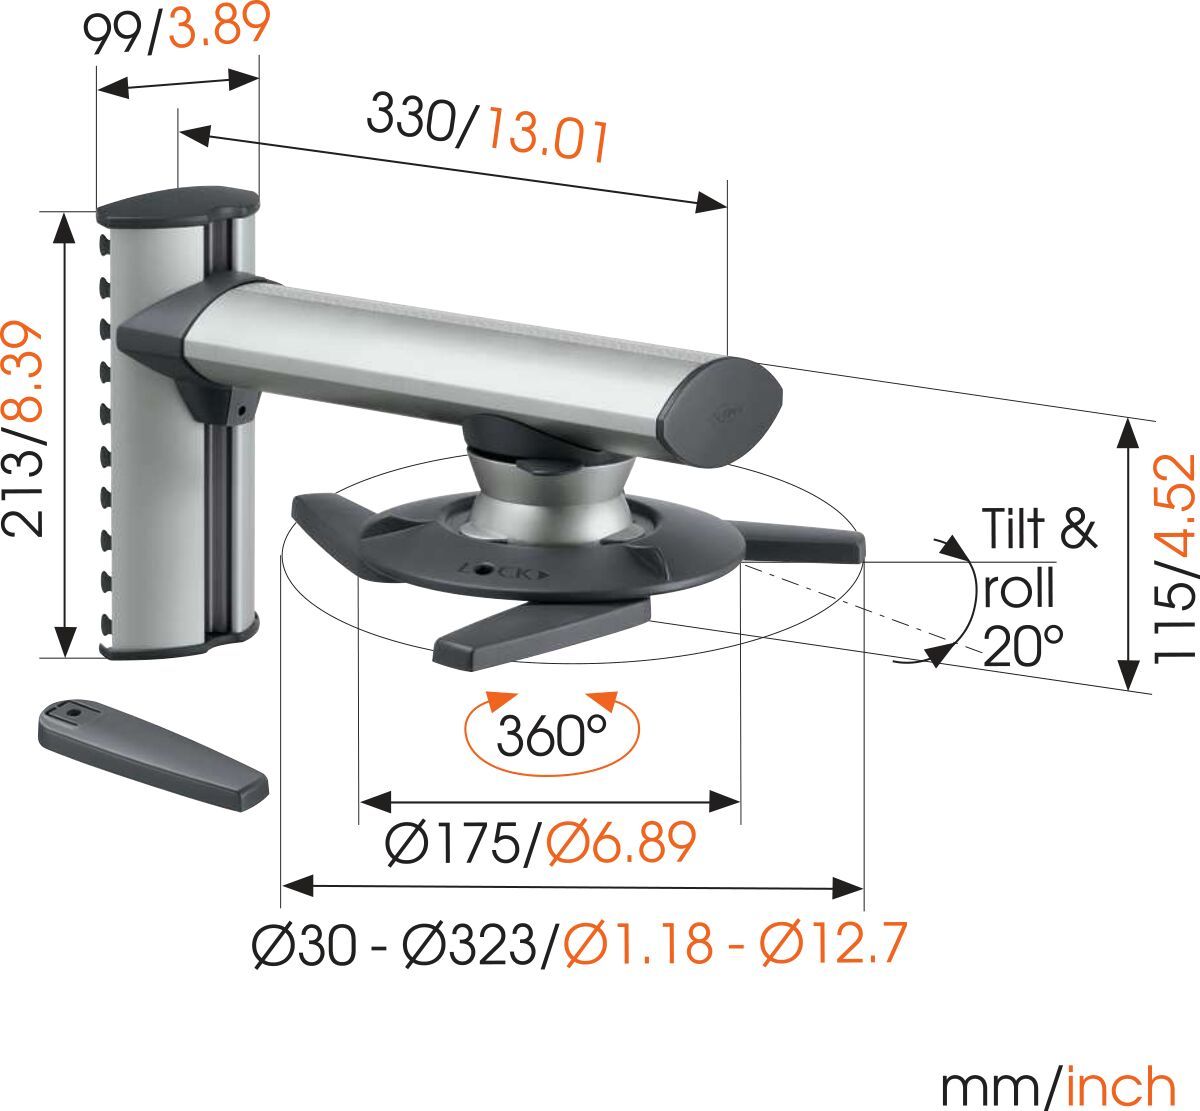 Vogel's EPW 6565 Projector Wall Mount - Max. weight load: Dimensions